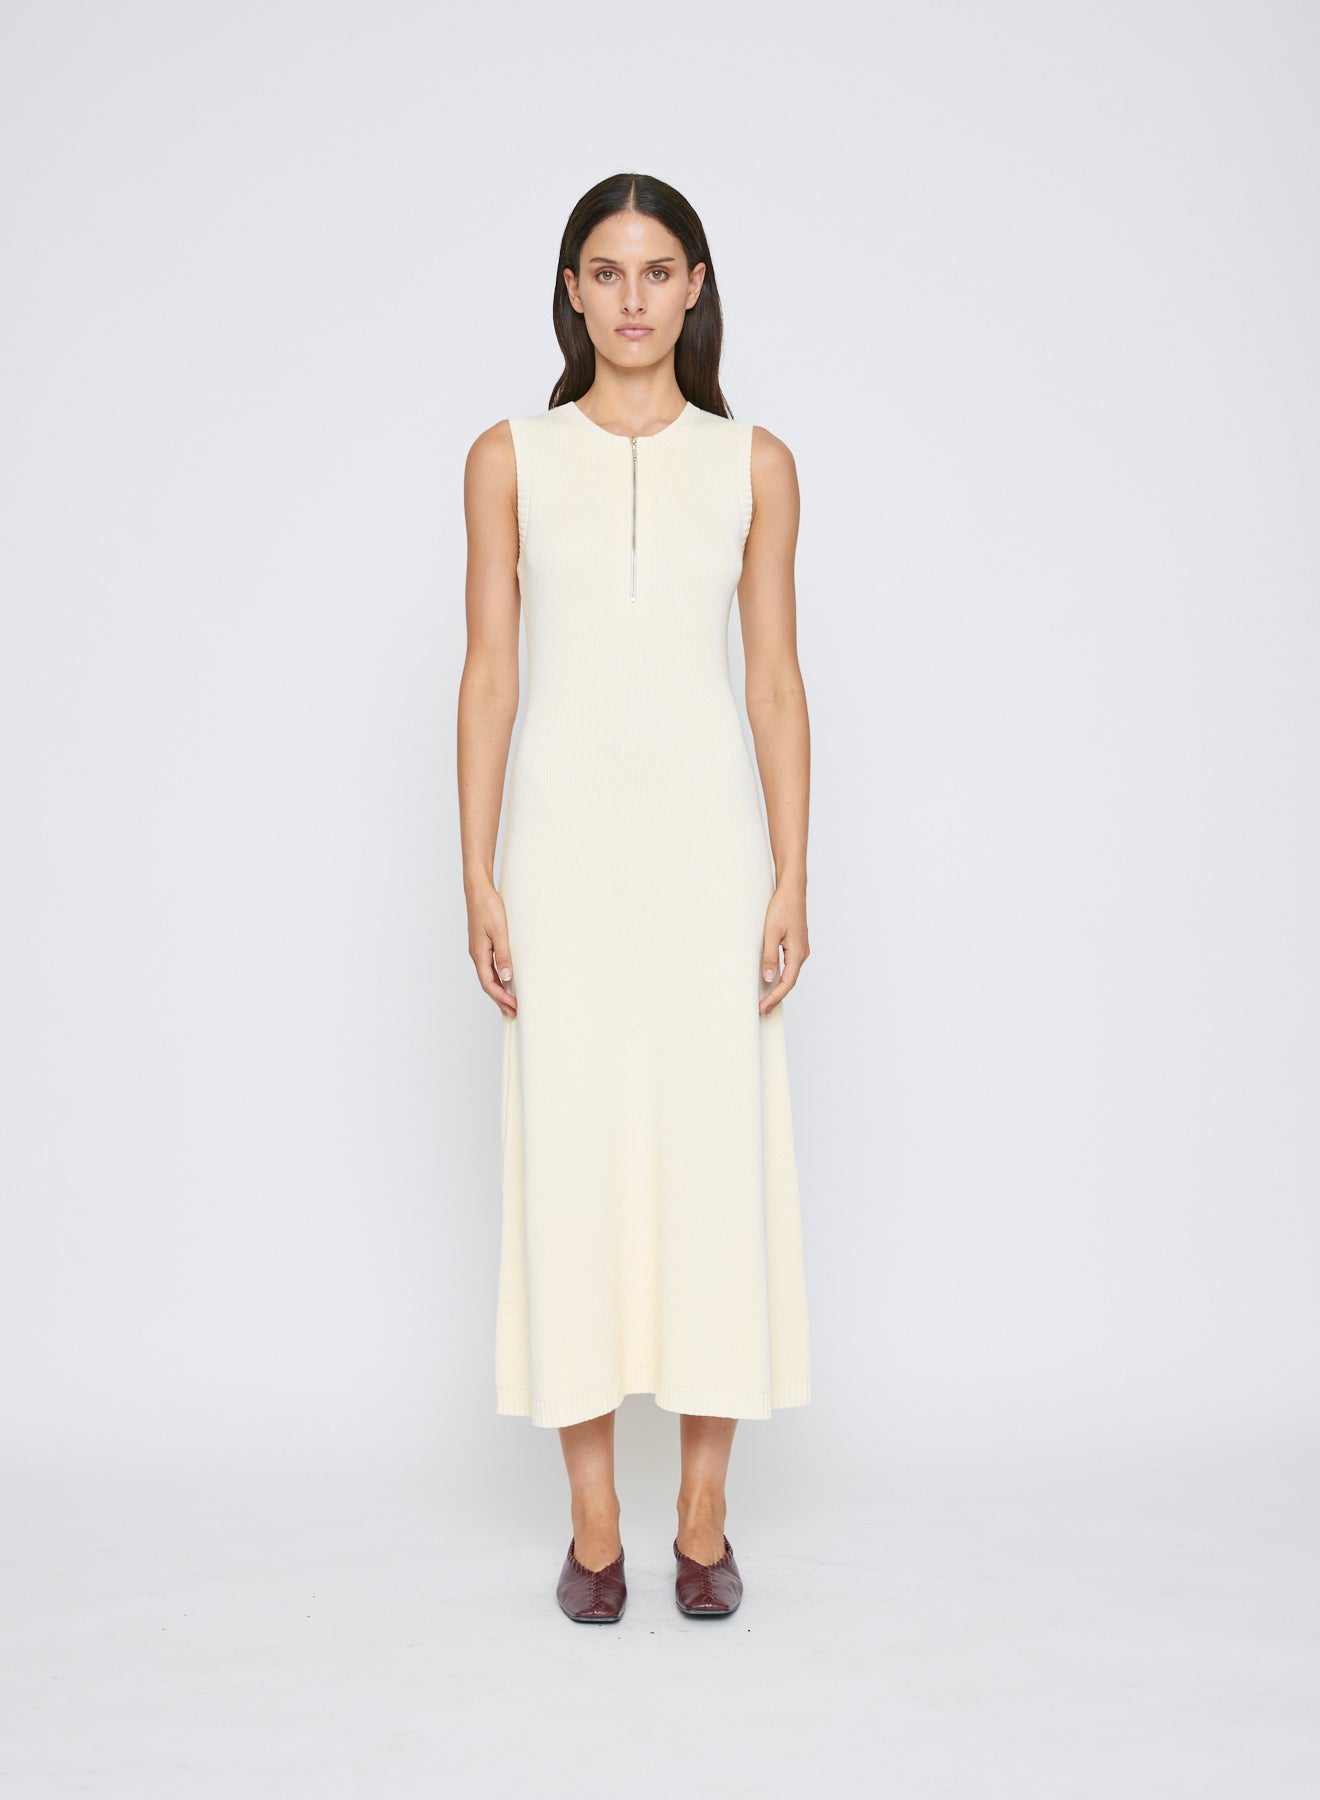 The ANNA QUAN Jennie Dress in Silence is an elevated day to night midi dress, cut in 100% cotton knit. Featuring a sleeveless design and zip closure at the bust.